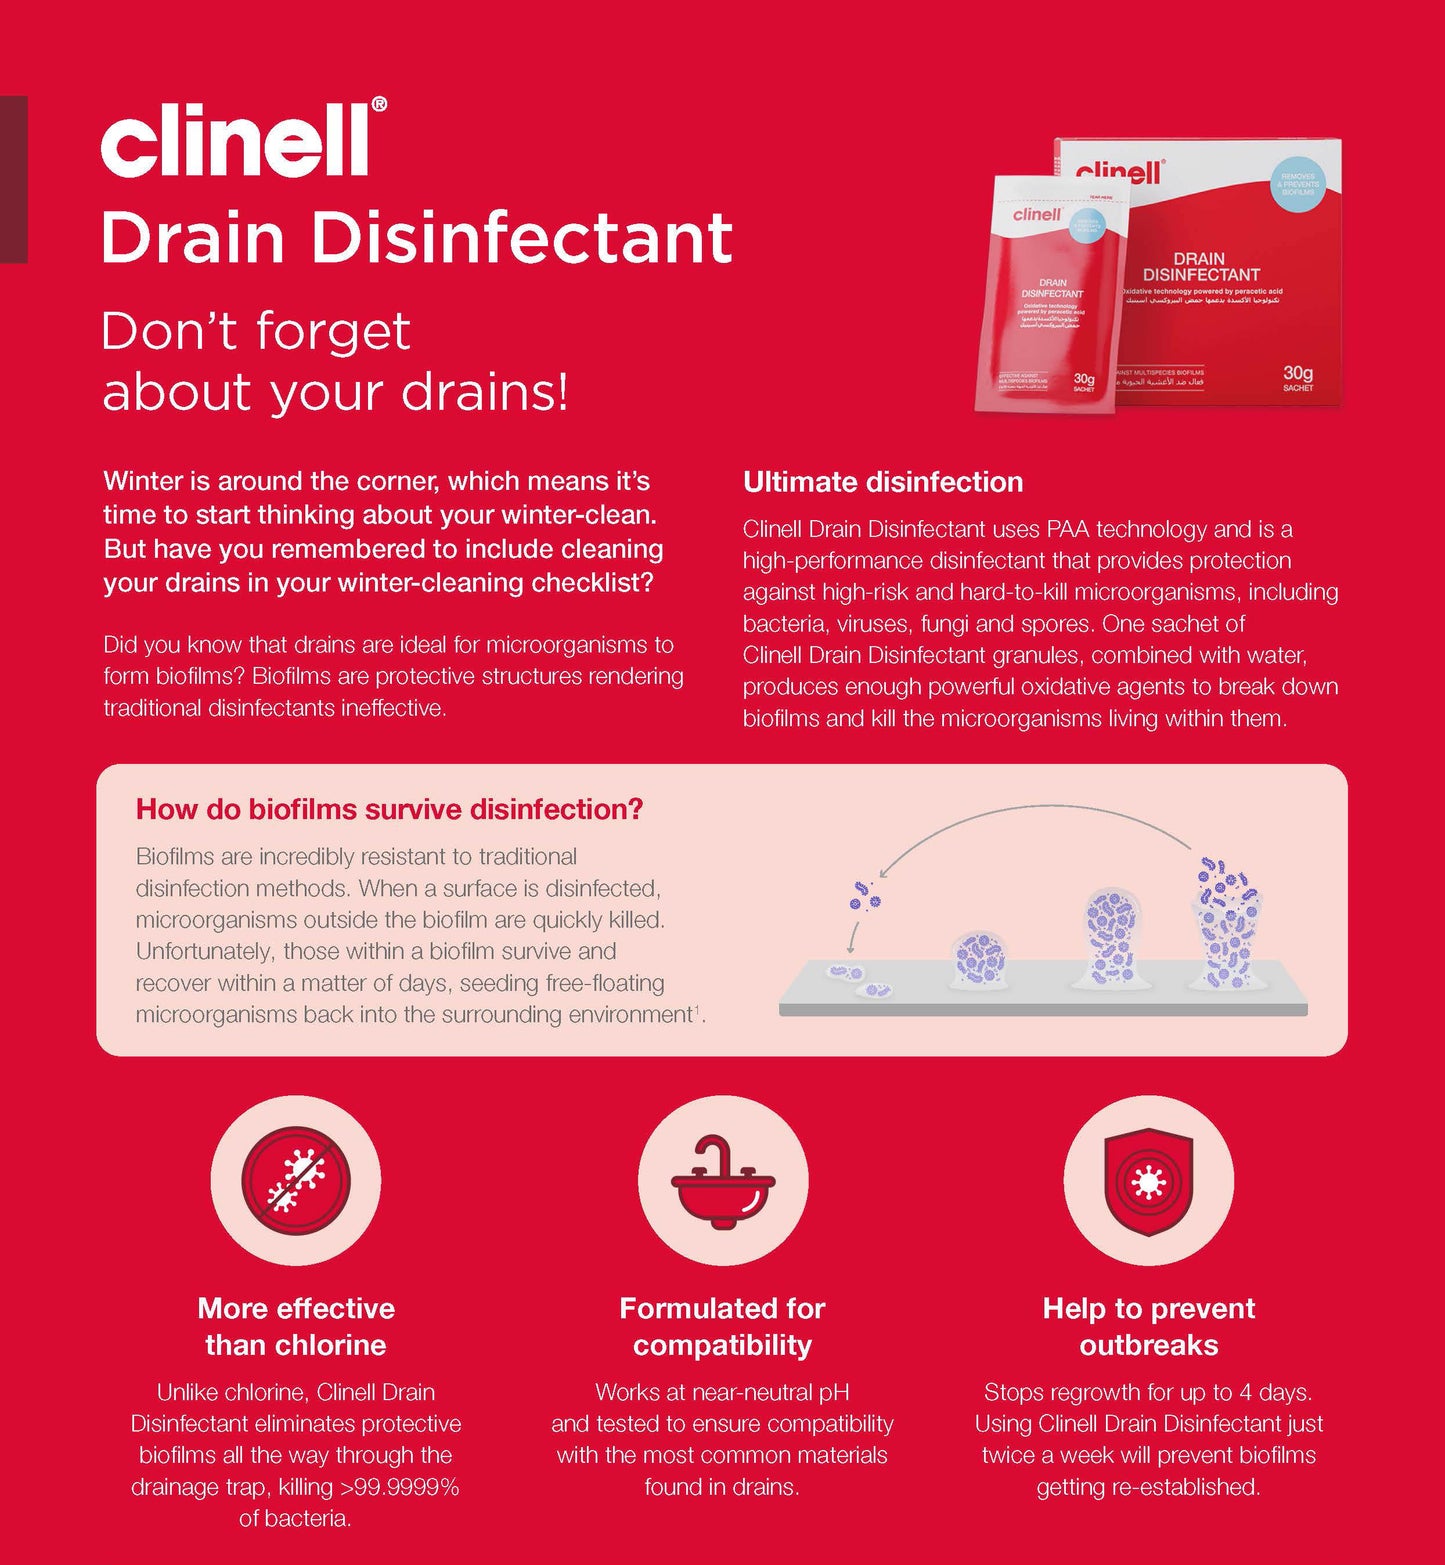 Clinell Drain Disinfectant Sachets (30g) - Box of 24